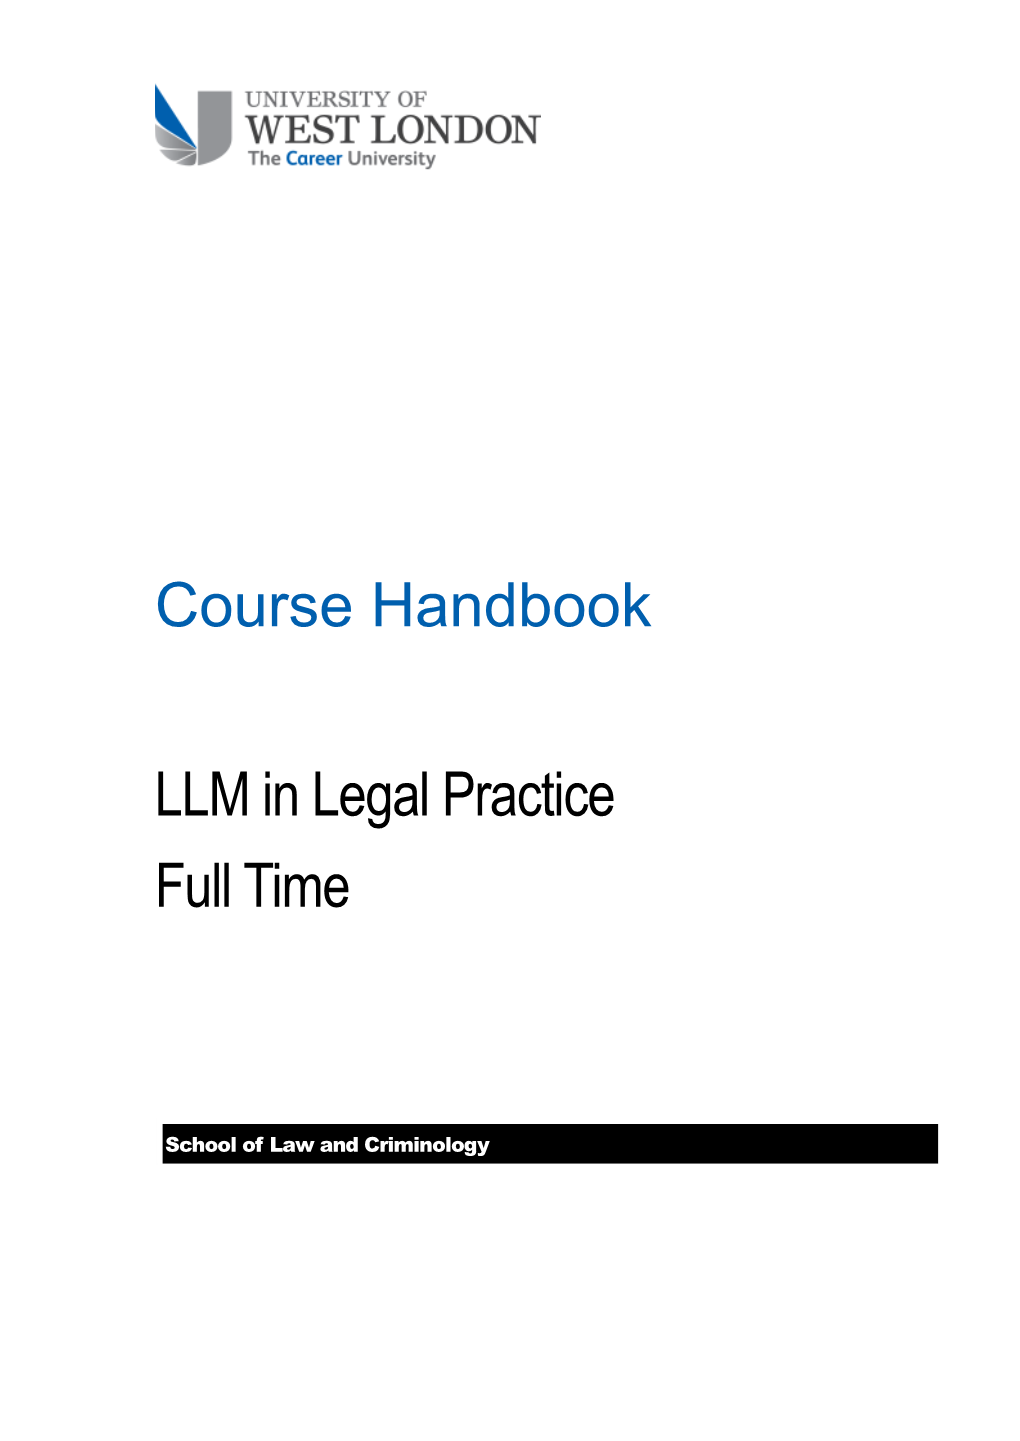 Course Handbook LLM in Legal Practice Full Time